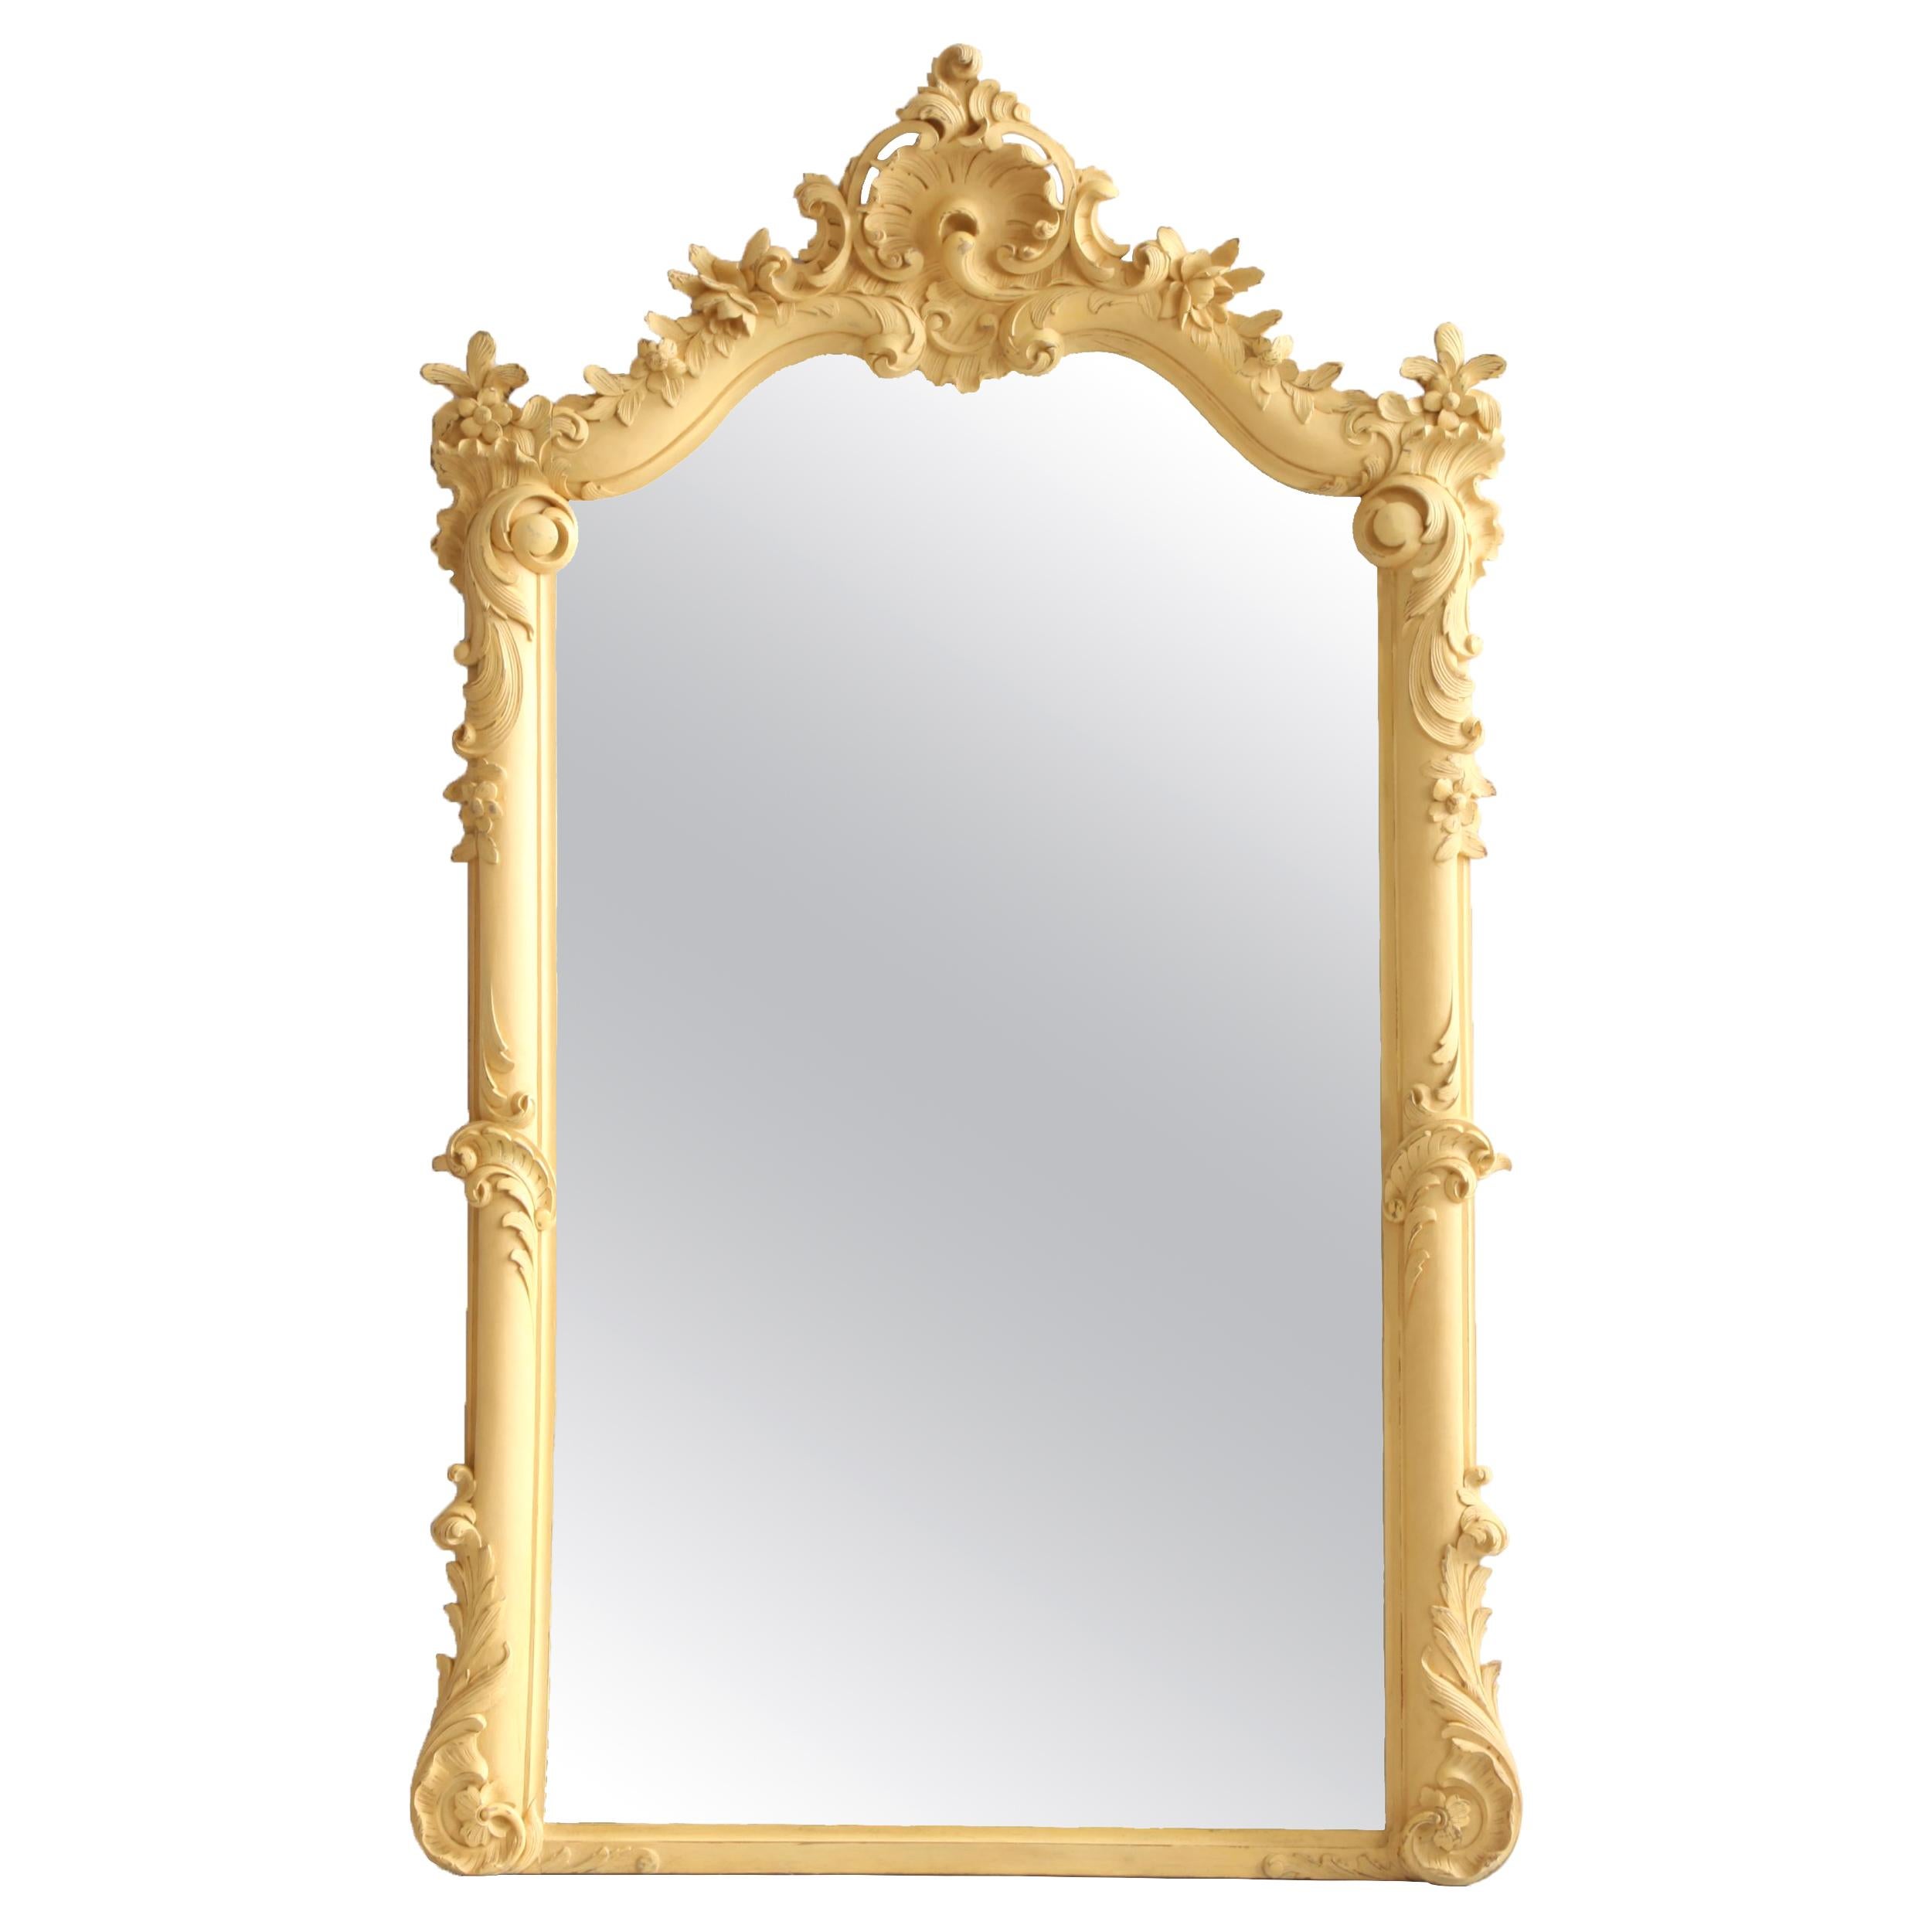 Late 19th Century French Rocaille Mirror